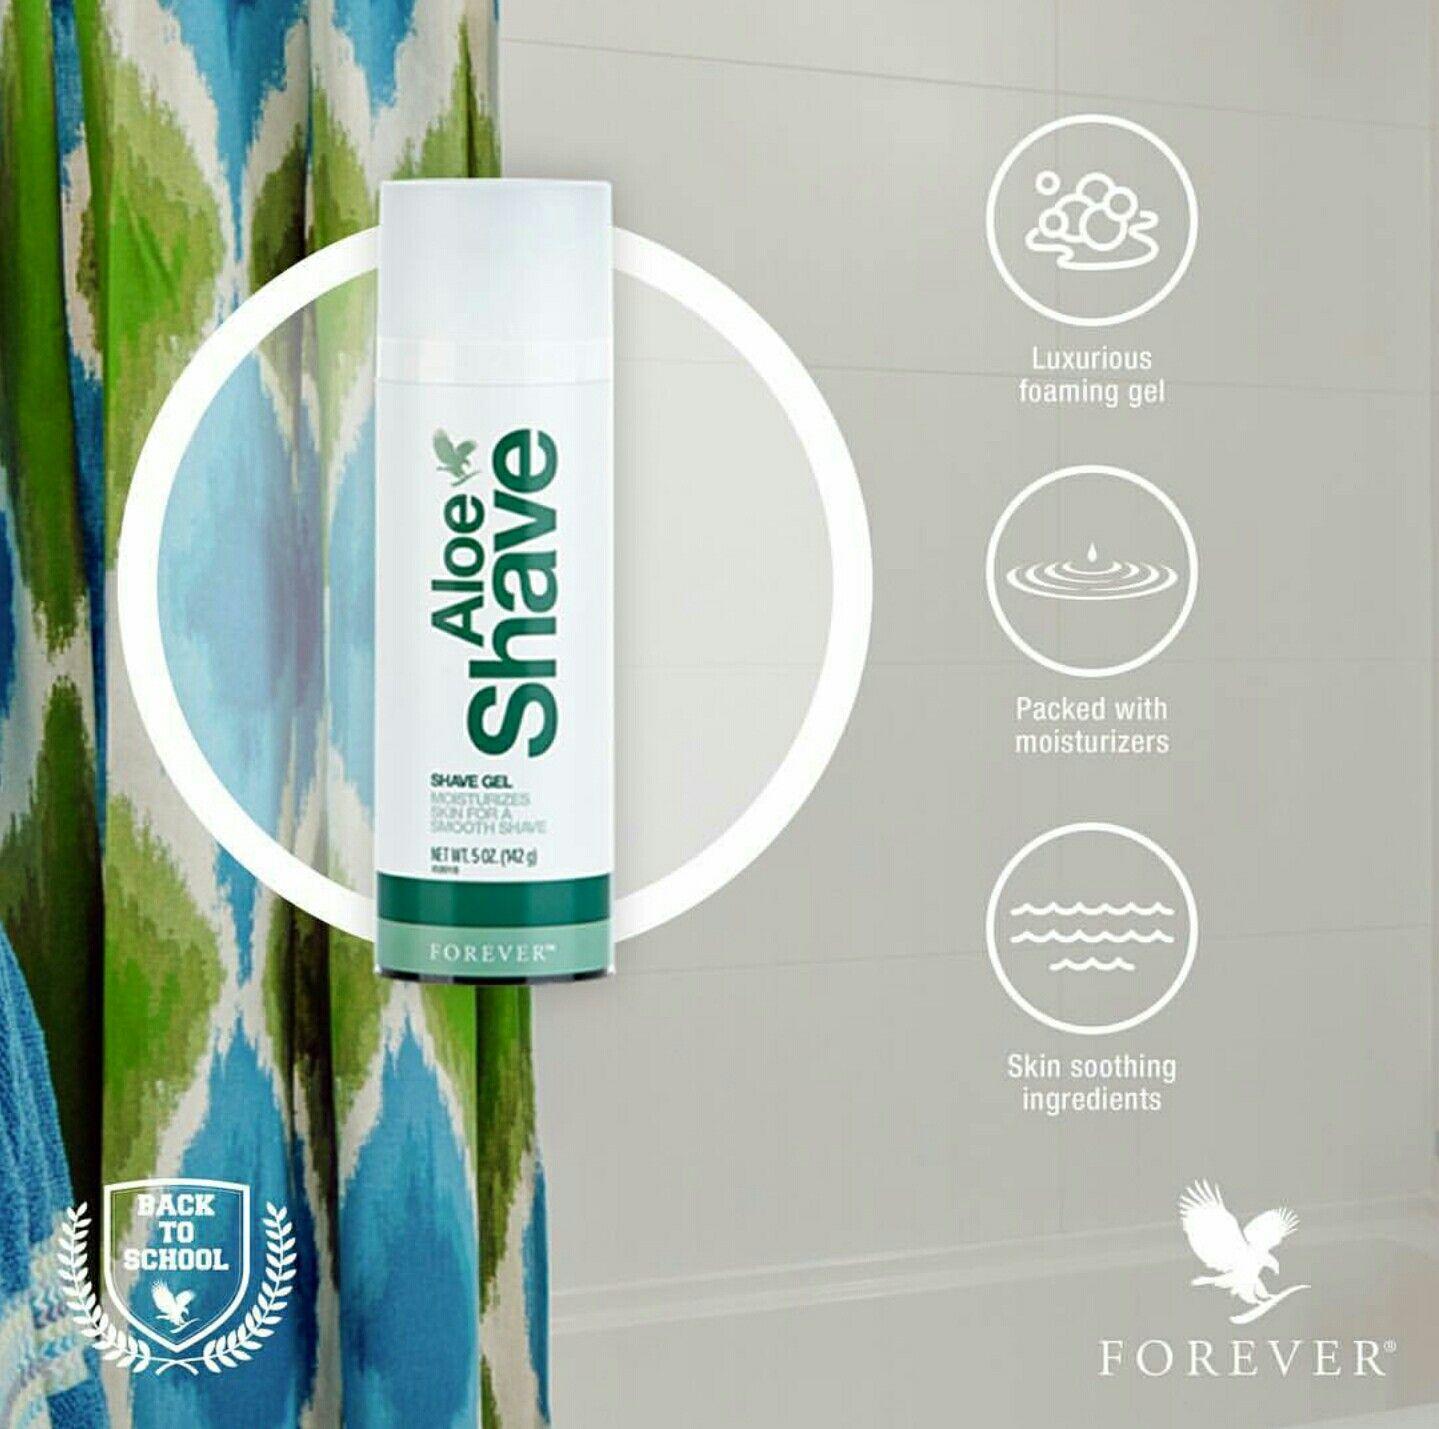 Shaving and Personal Care Products Logo - Aloe Shave. Forever Personal Care. Forever living